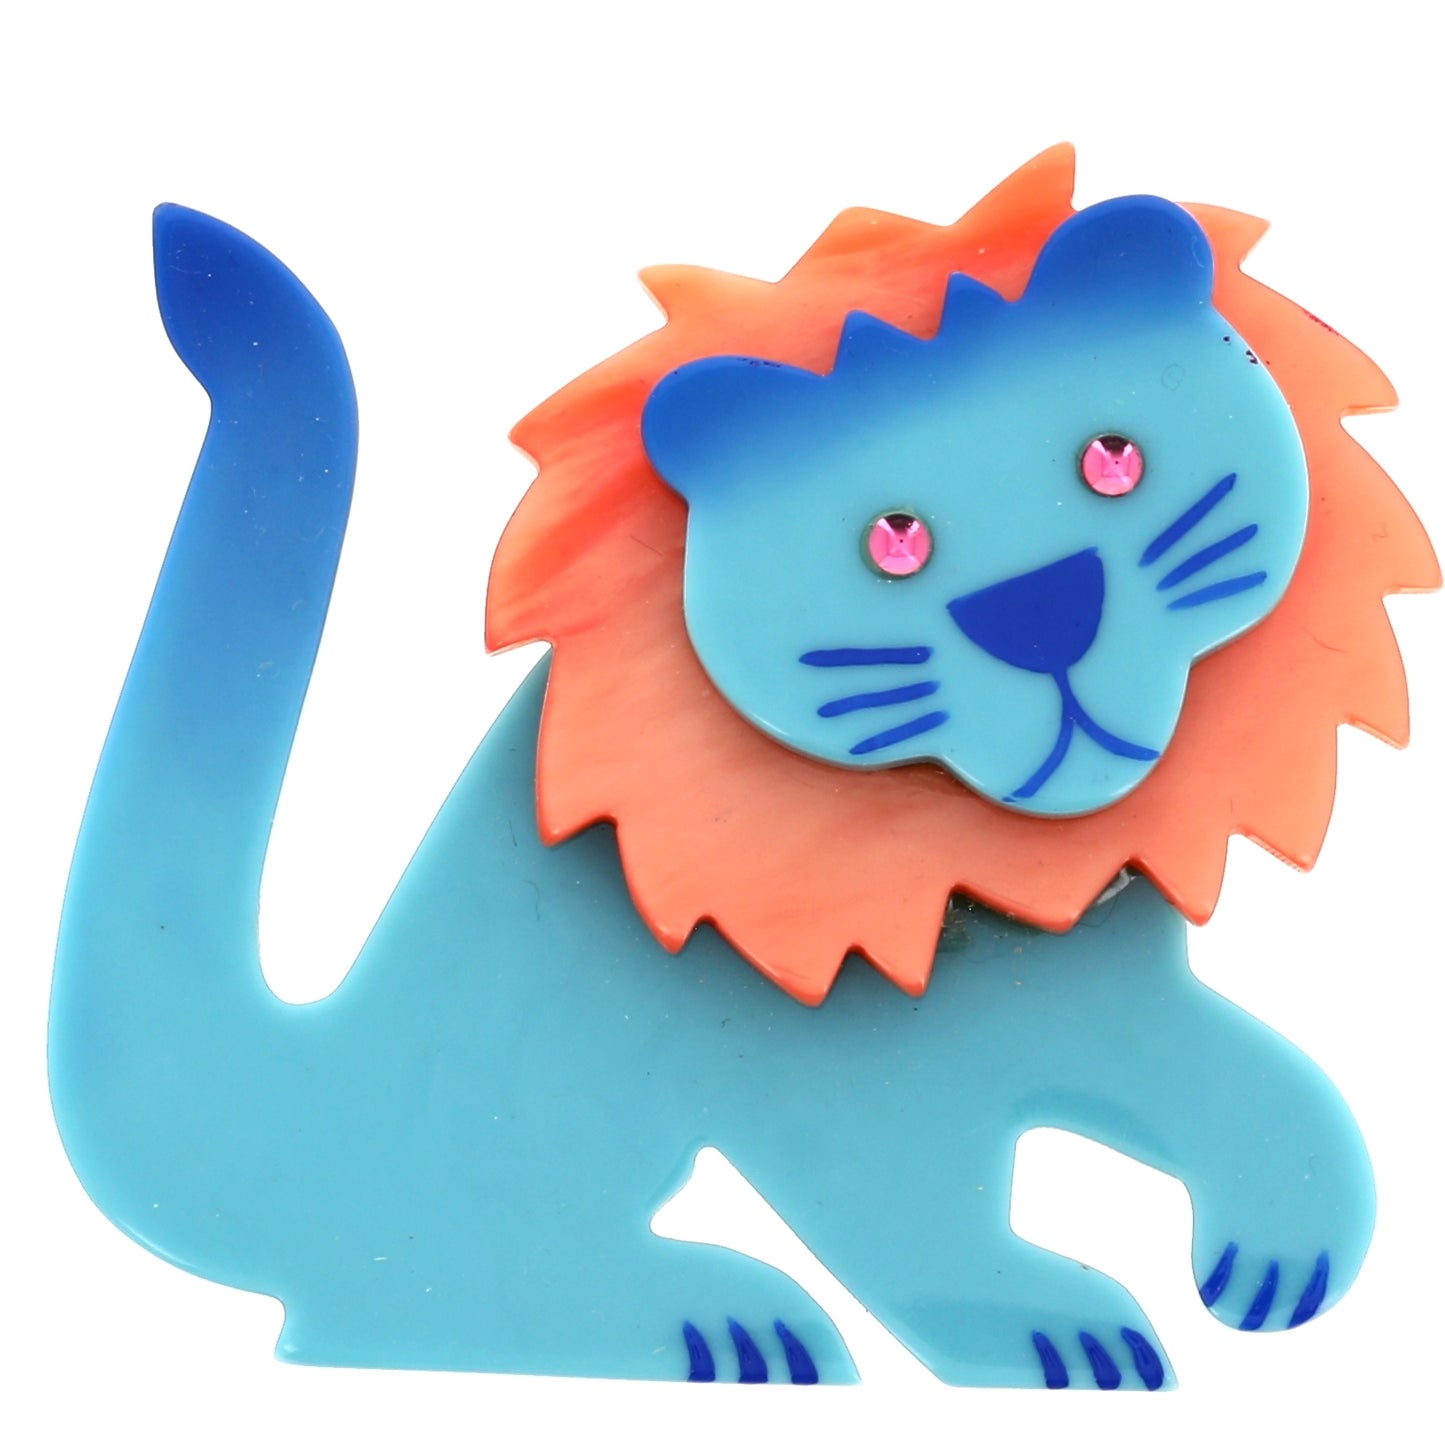 Azur and pink Leo Lion Brooch in galalith